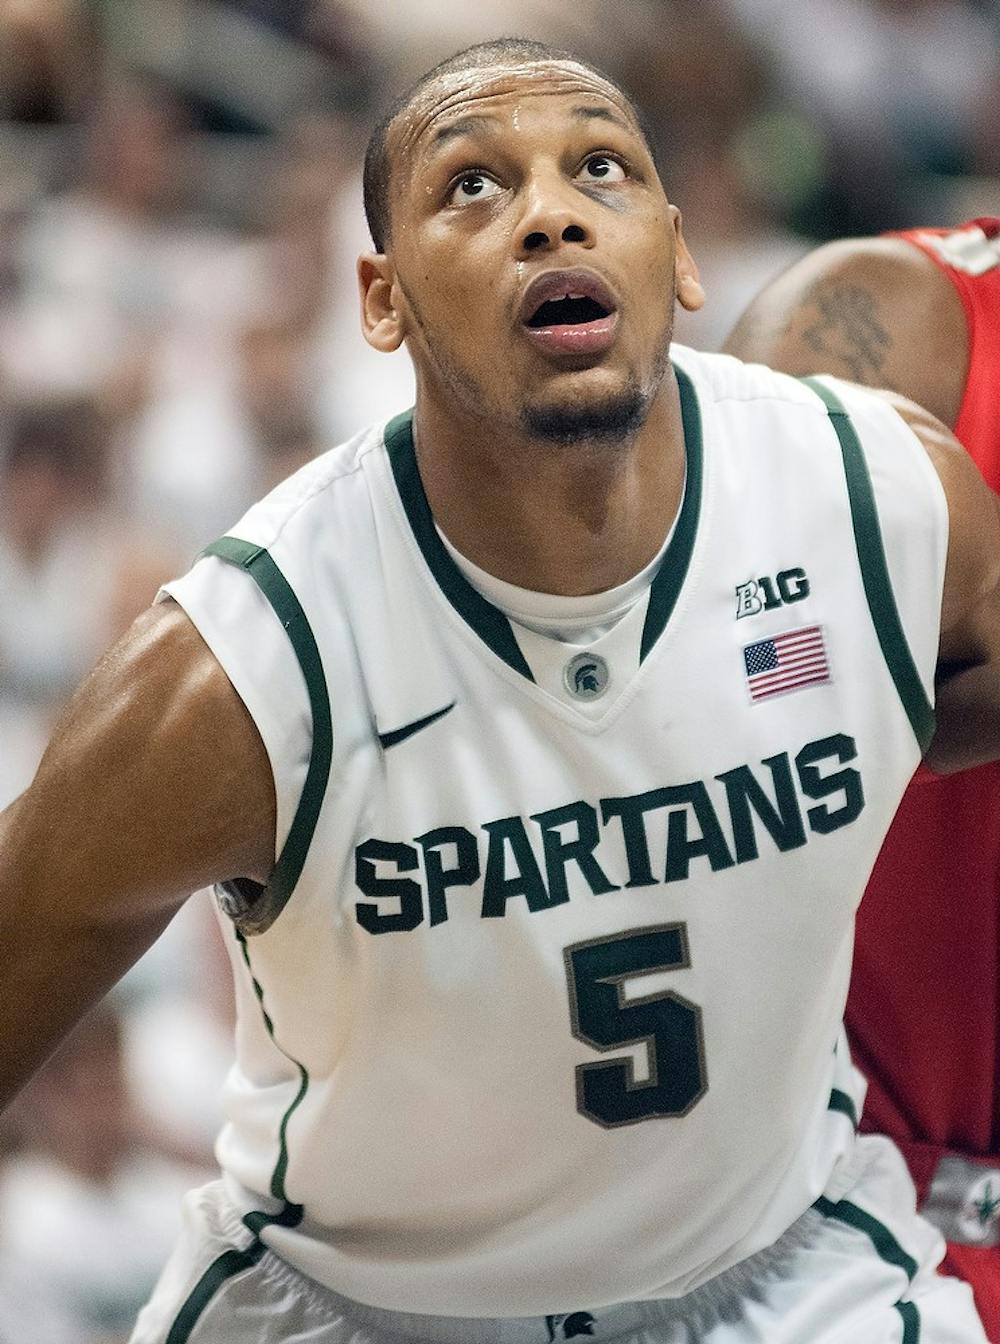 	<p>Junior center Adreian Payne awaits a rebound Saturday, Jan. 19, 2013, at Breslin Center. The Spartans defeated Ohio State 59-56, improving <span class="caps">MSU</span>&#8217;s record to 5-1 in the Big Ten. Adam Toolin/The State News</p>